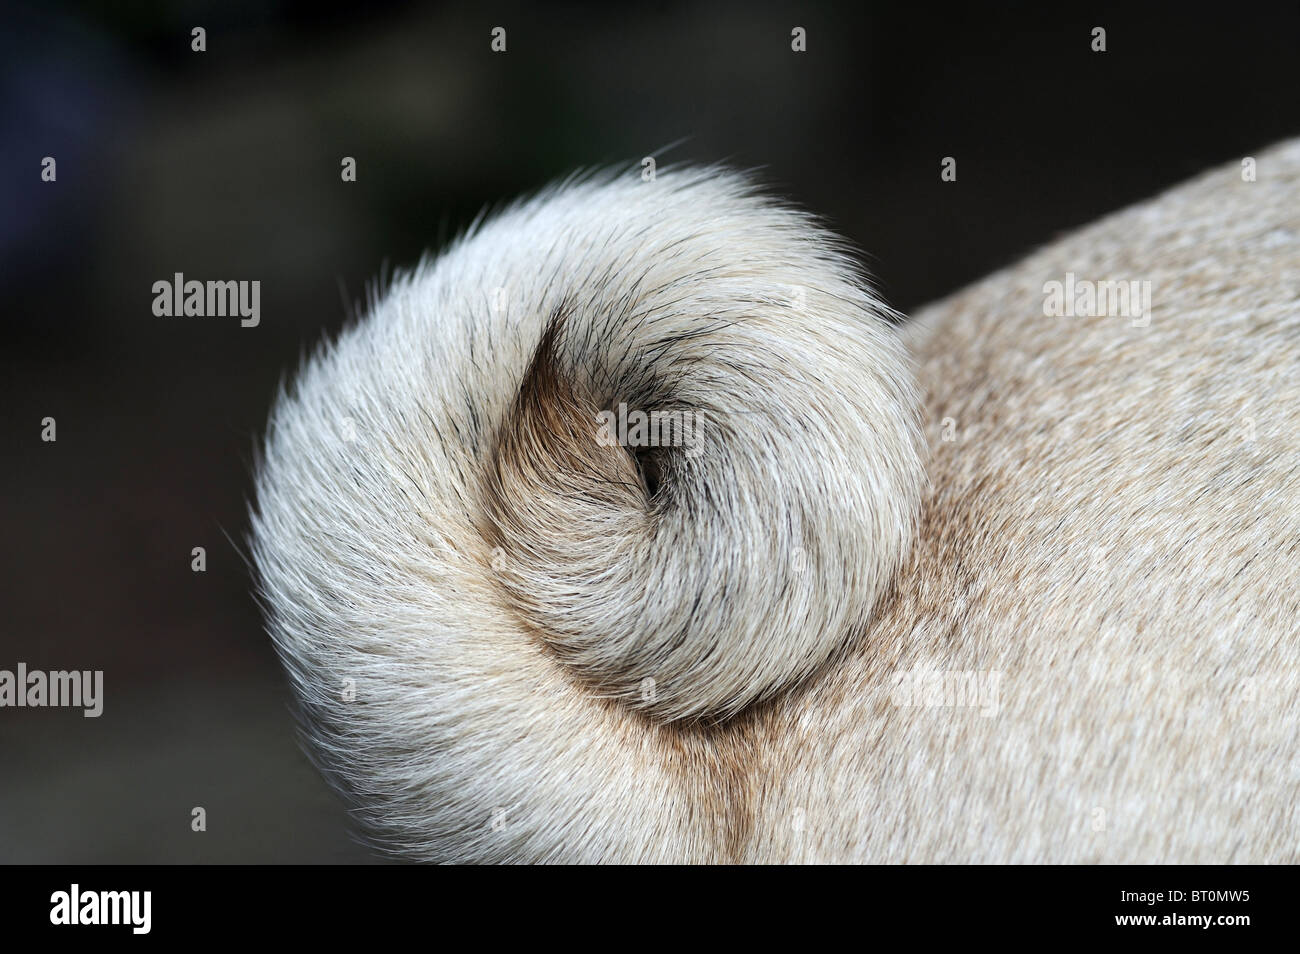 Pug (Canis lupus familiaris), close-up of the characteristic curly tail. Stock Photo